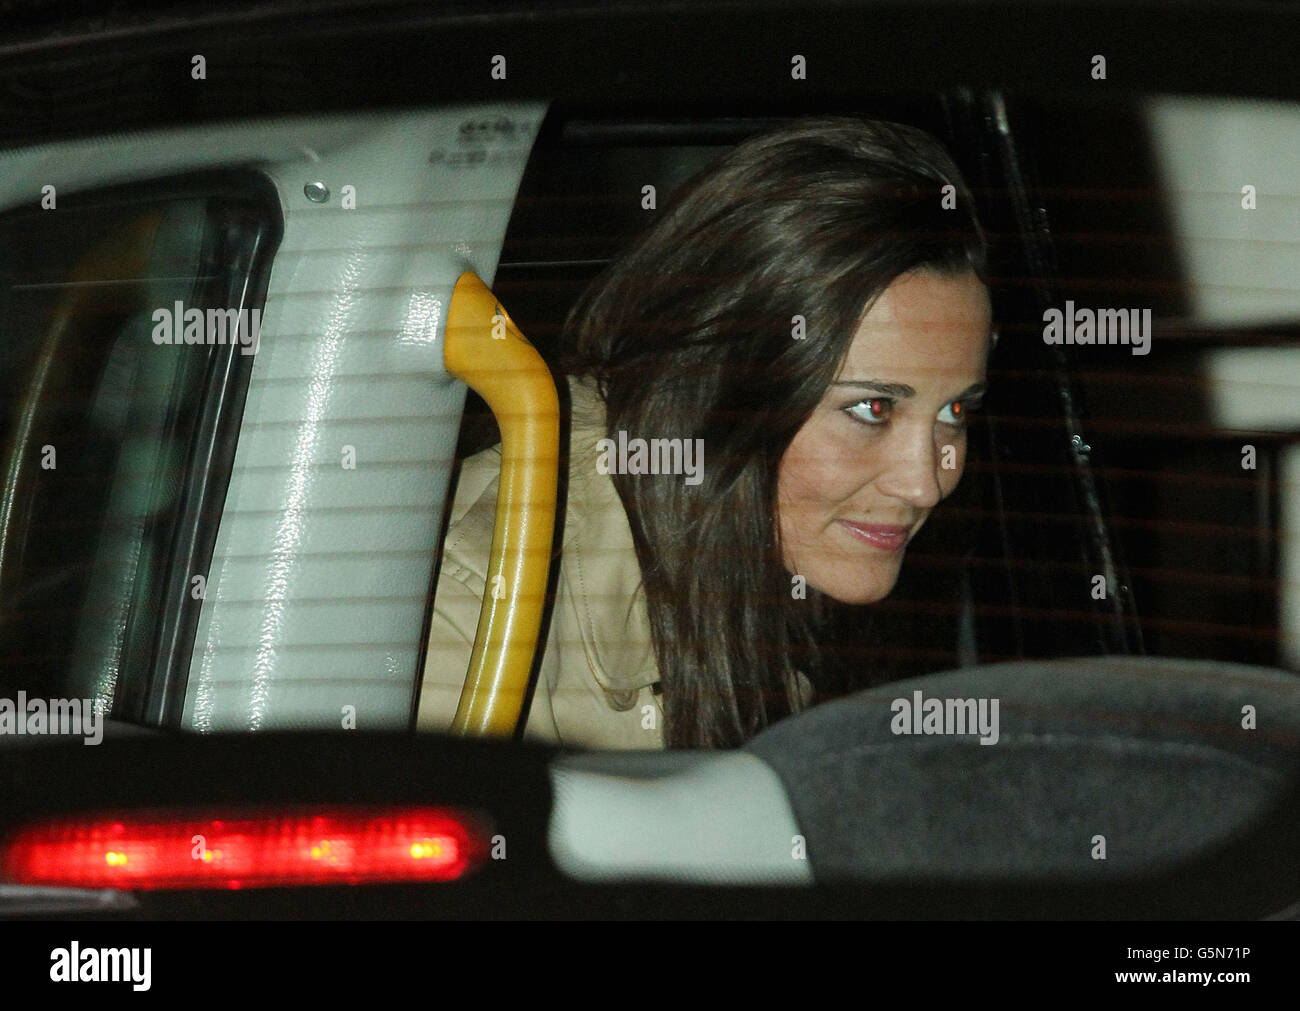 Pippa Middleton leaves the King Edward VII hospital in London after visiting her sister, the Duchess of Cambridge, who was admitted to the hospital on Monday with severe morning sickness. Stock Photo